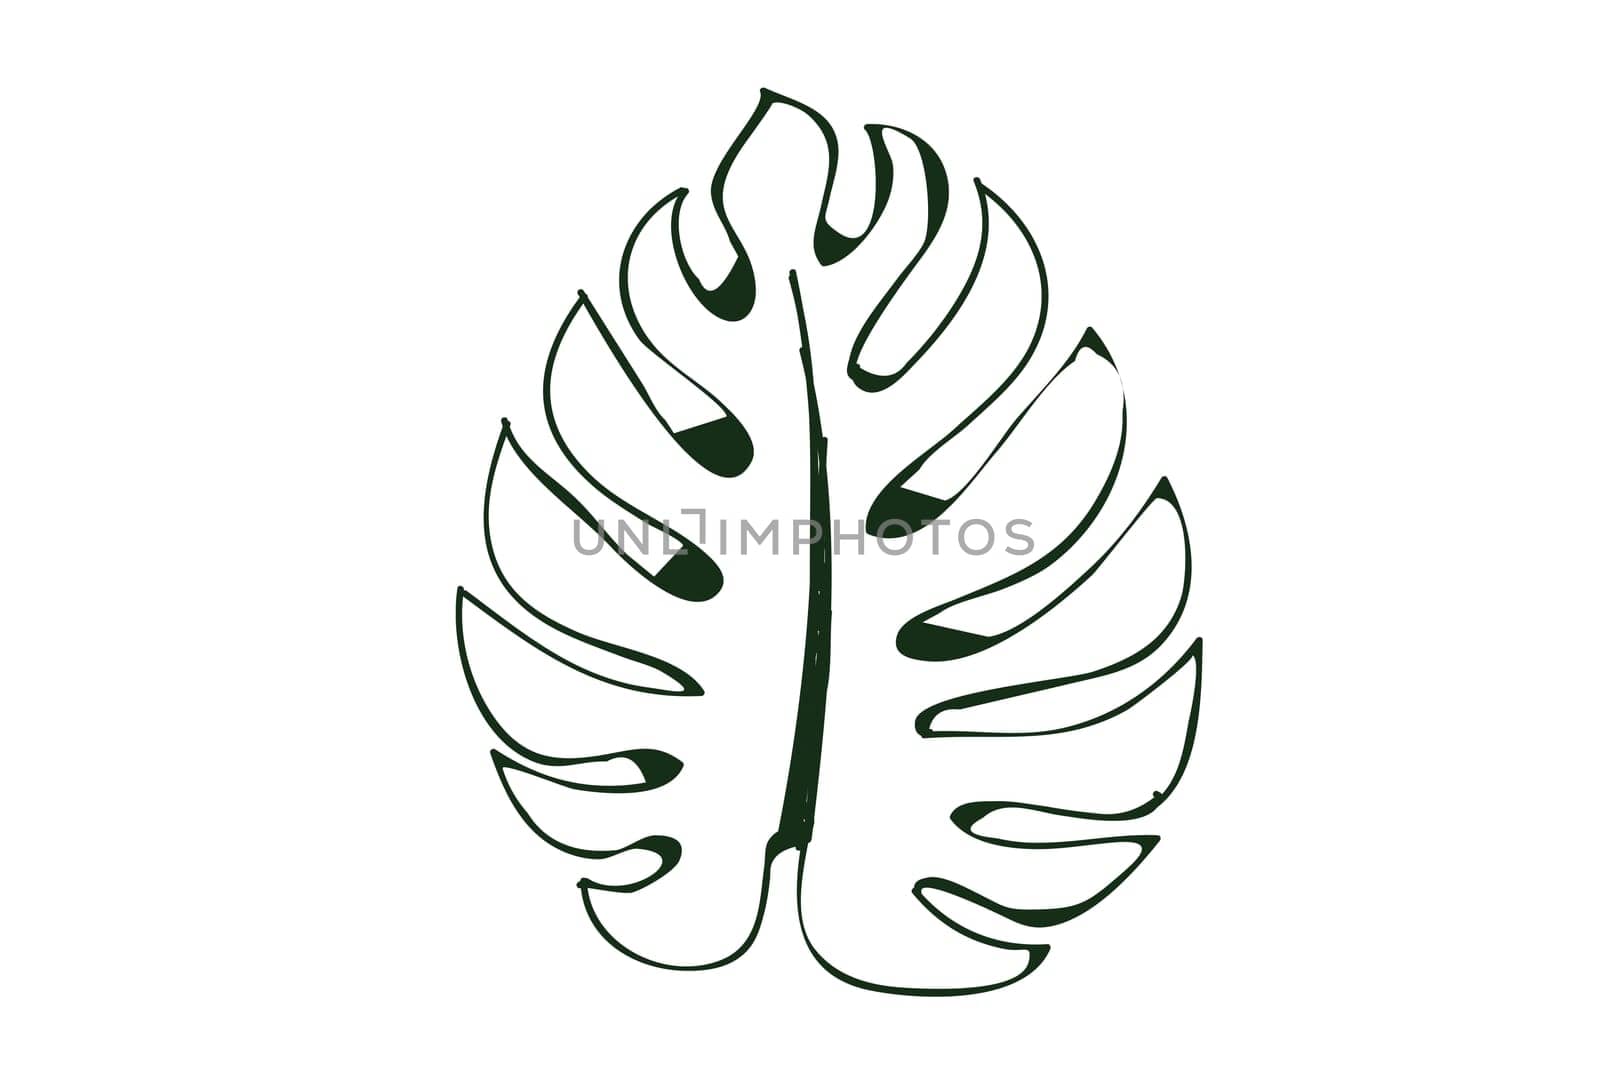 Monstera leaf line art on white background, isolated by sarayut_thaneerat